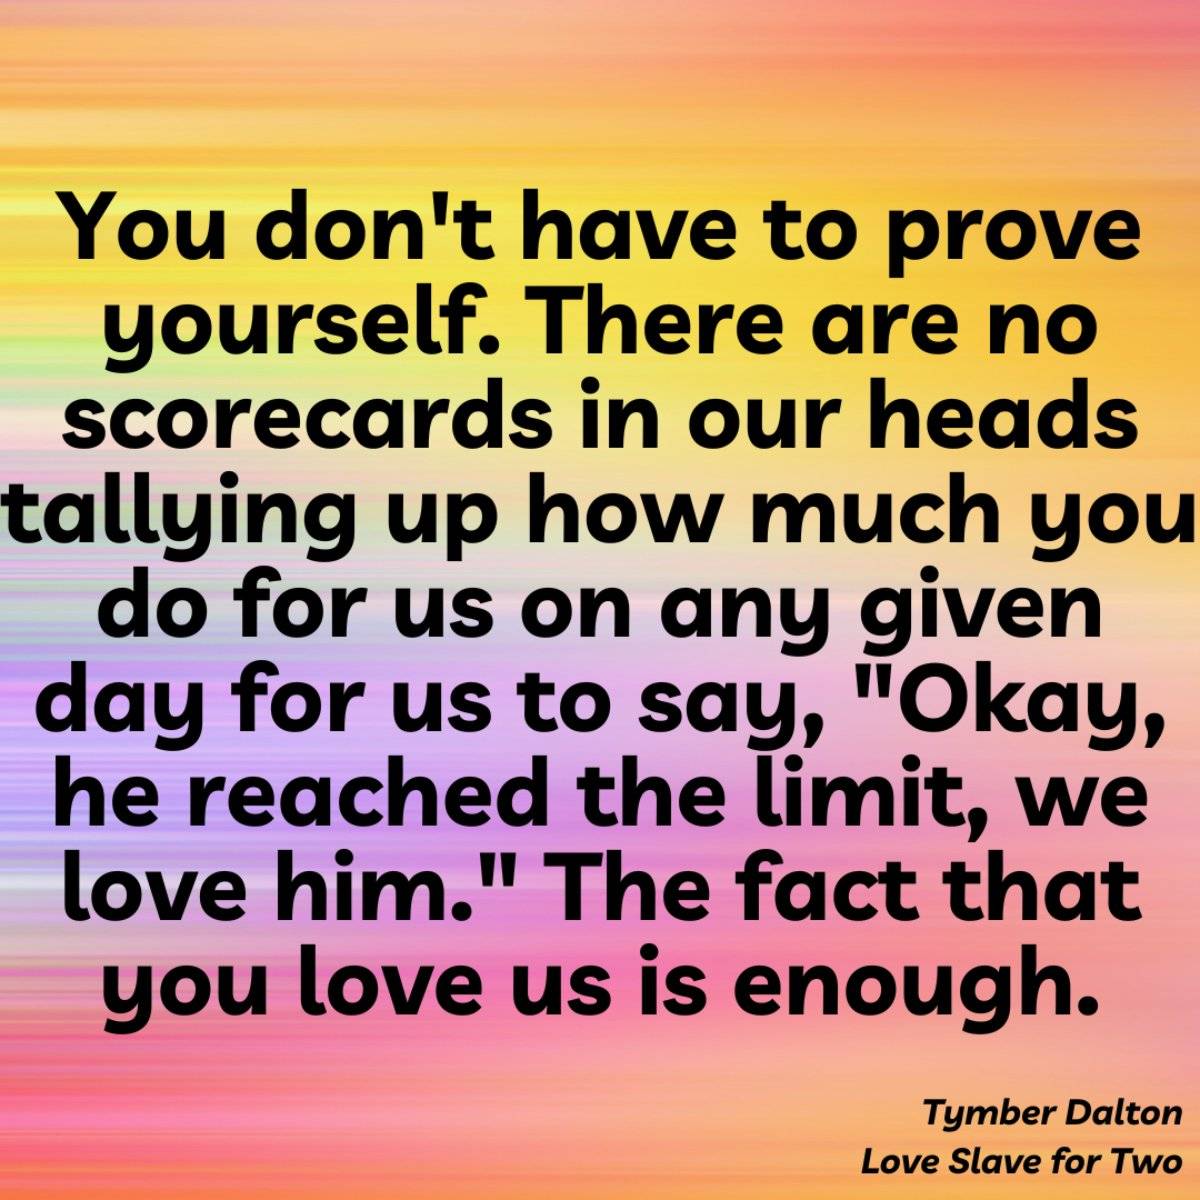 You don't have to prove yourself. There are no scorecards in our heads tallying up how much you do for us on any given day for us to say, “Okay, he reached the limit, we love him.“ The fact that you love us is enough. From Love Slave for Two by Tymber Dalton